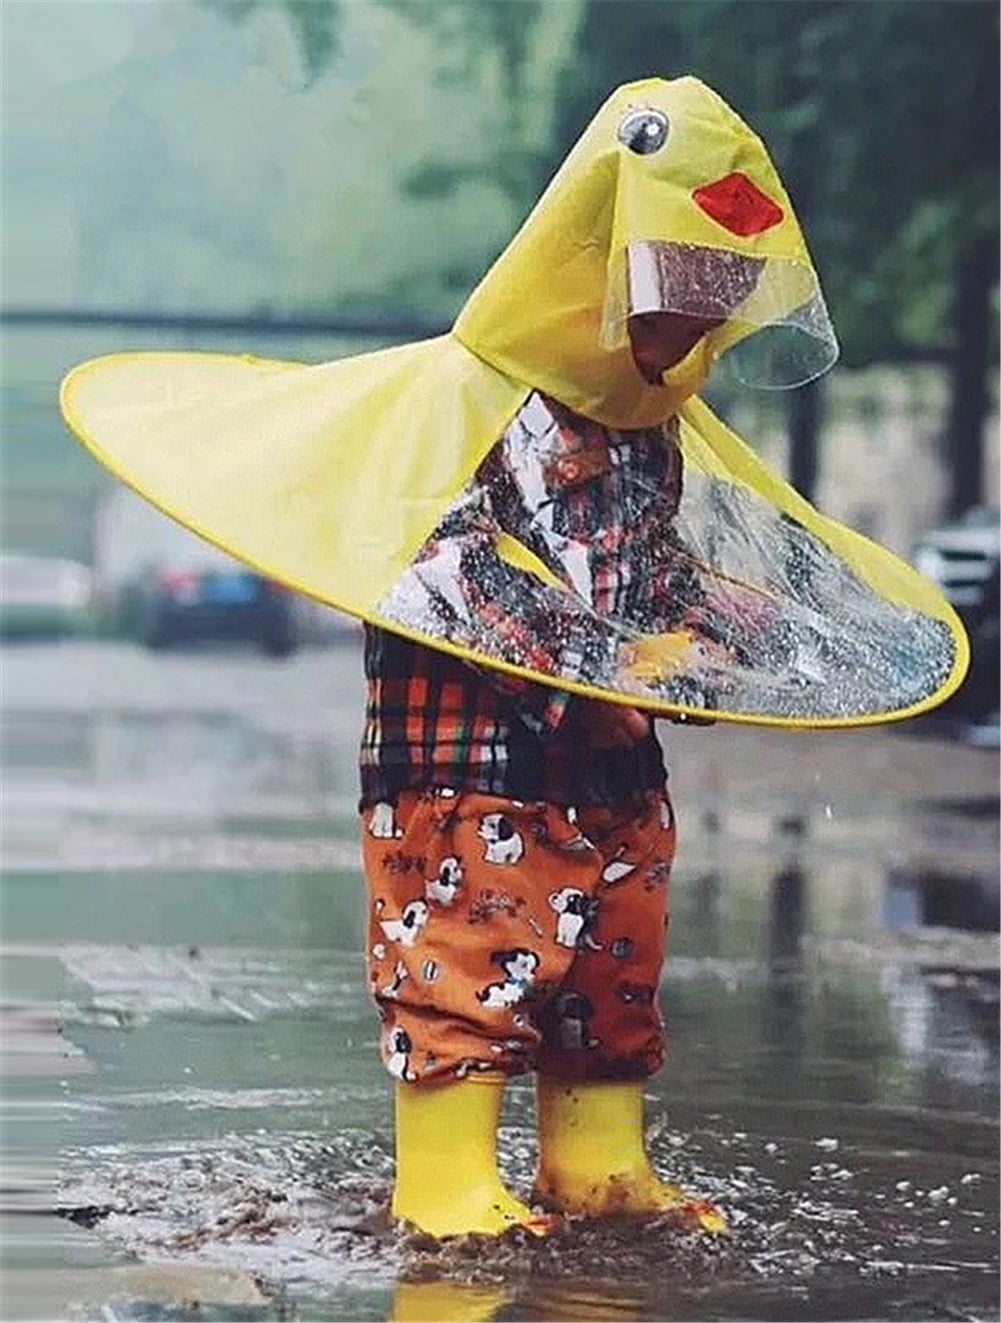 Flying Butterfly Head Umbrella Toddler Duck Raincoat and Umbrella Hat for Baby Girls and Boys,A,Small FHGH Children Raincoat Poncho 